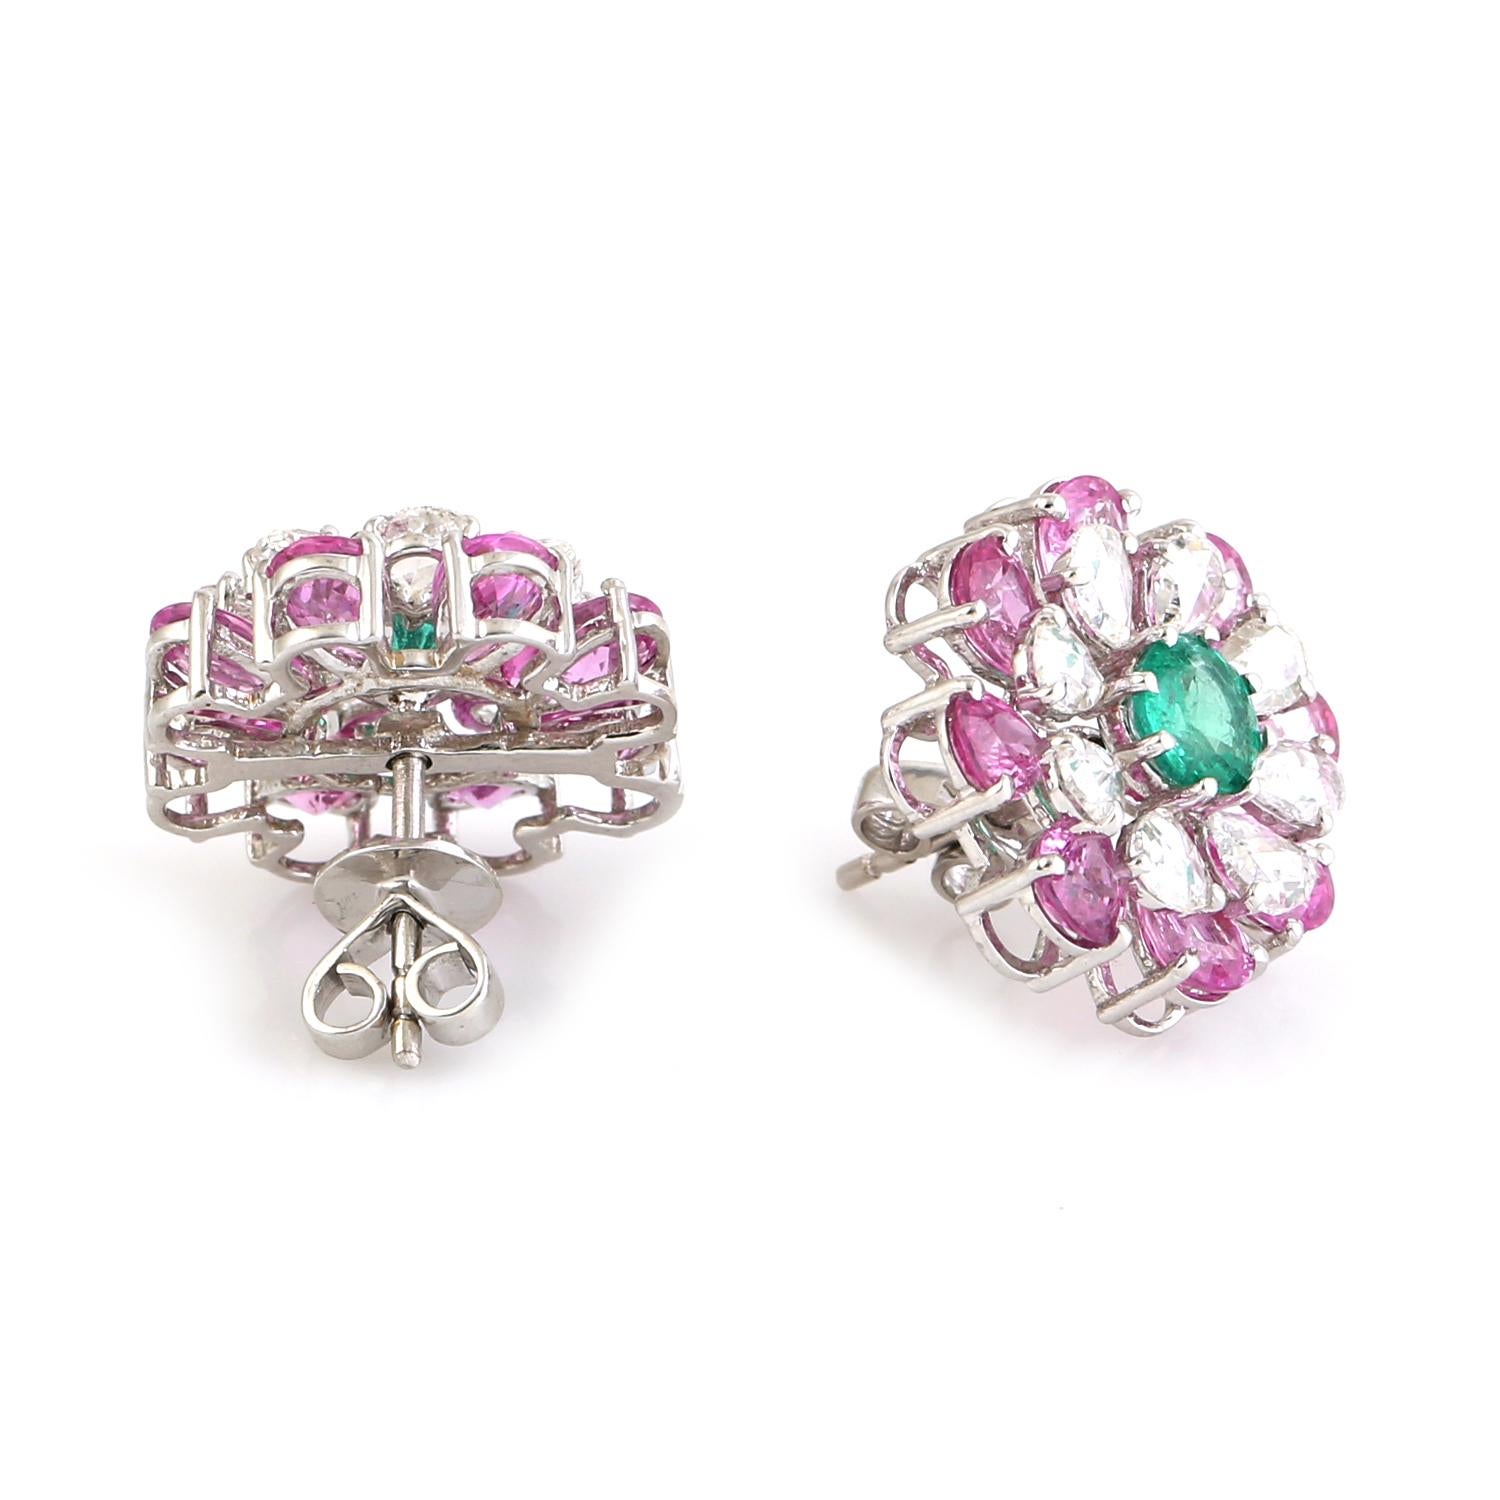 Contemporary 6.88 ct Pink Sapphire Earrings With Emerald Made In 18kt White Gold For Sale